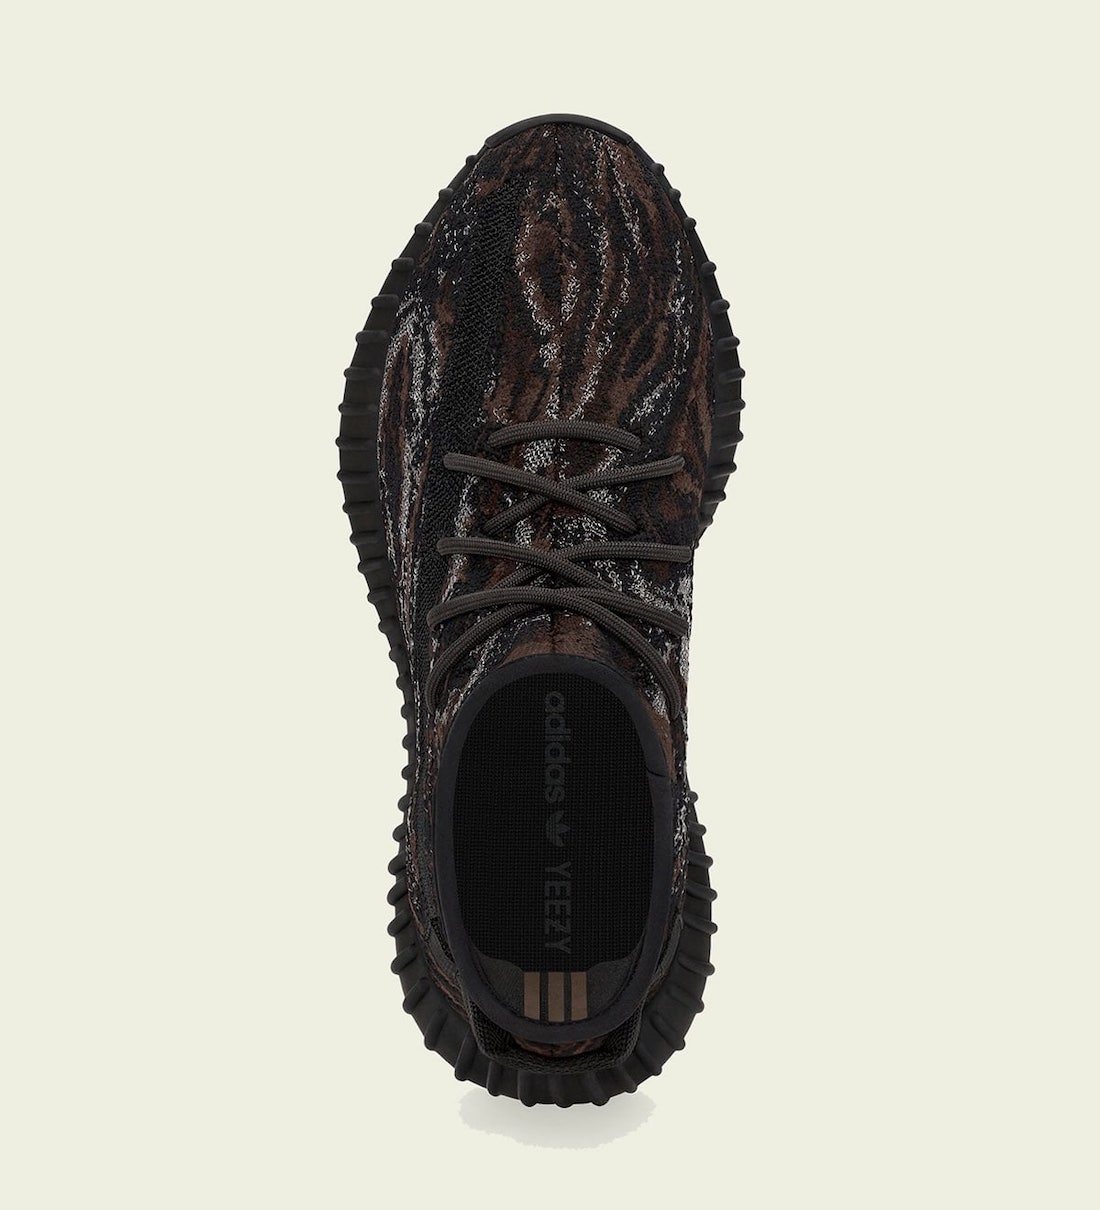 adidas Yeezy Boost 350 V2 MX Rock GW3774 Release Date Price